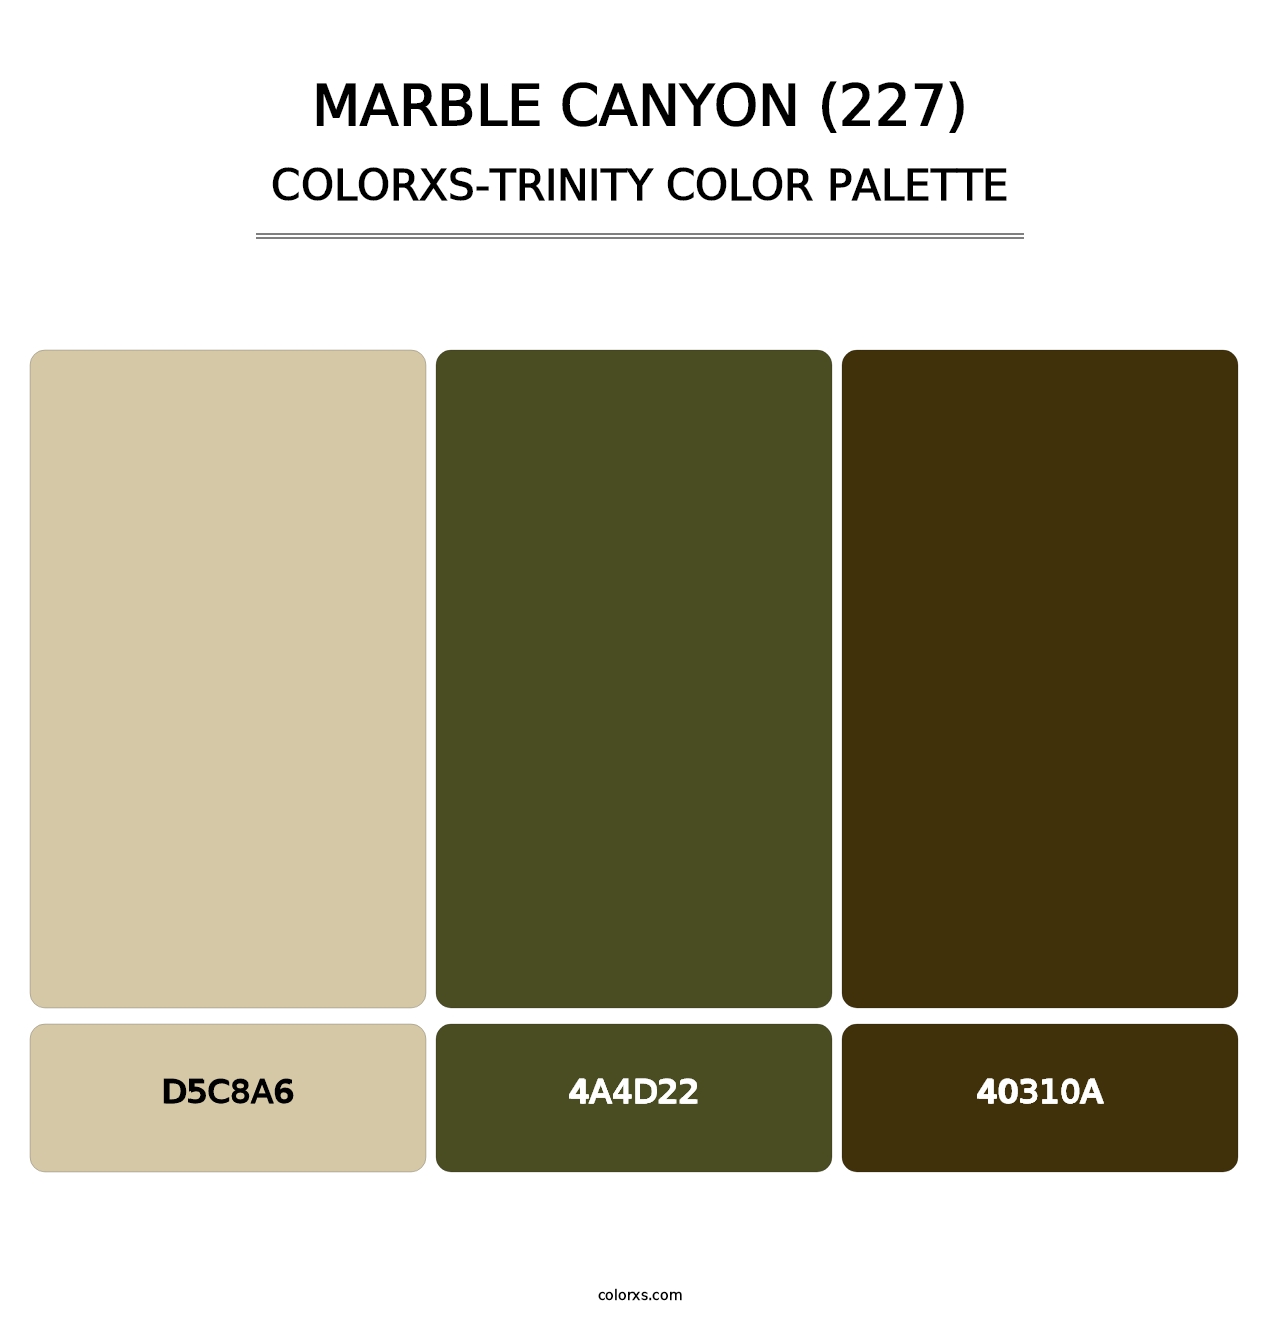 Marble Canyon (227) - Colorxs Trinity Palette